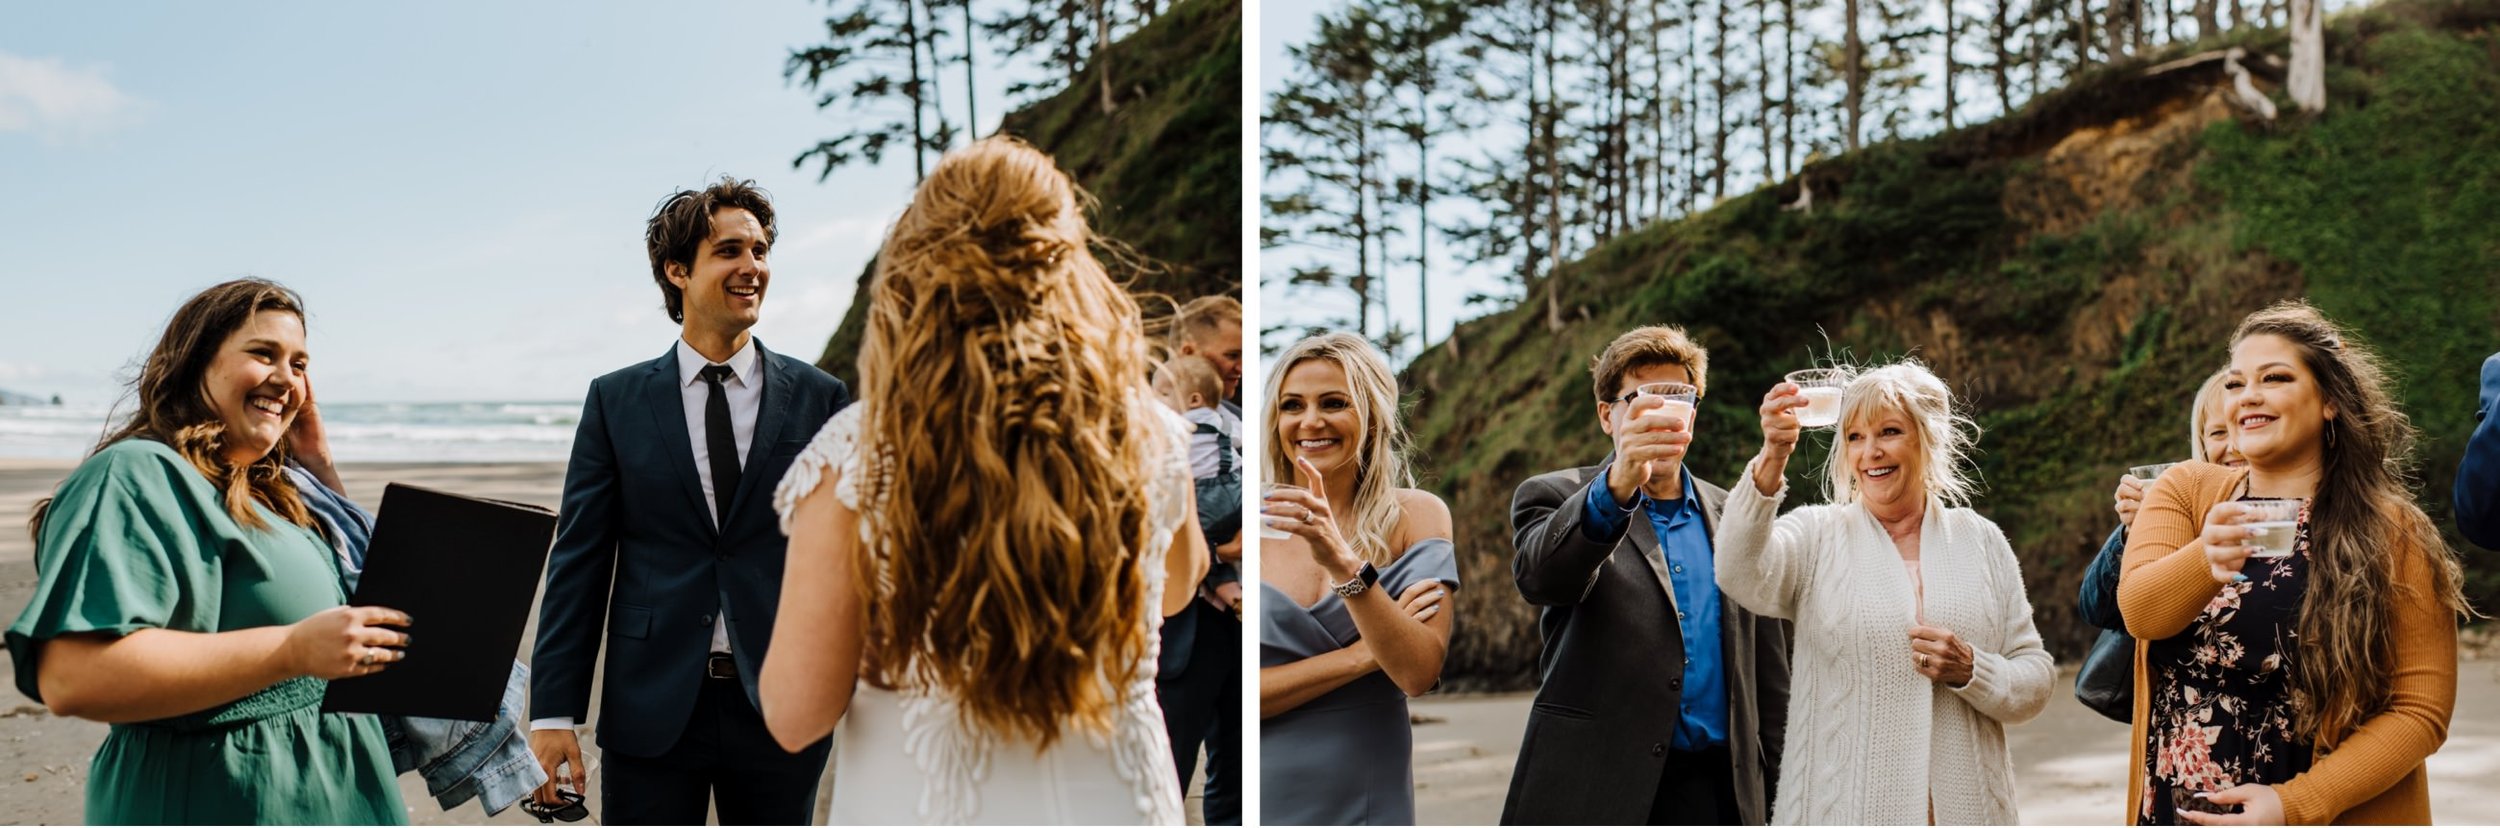 Intimate-Elopement-at-Ecola-State-Park059.jpg